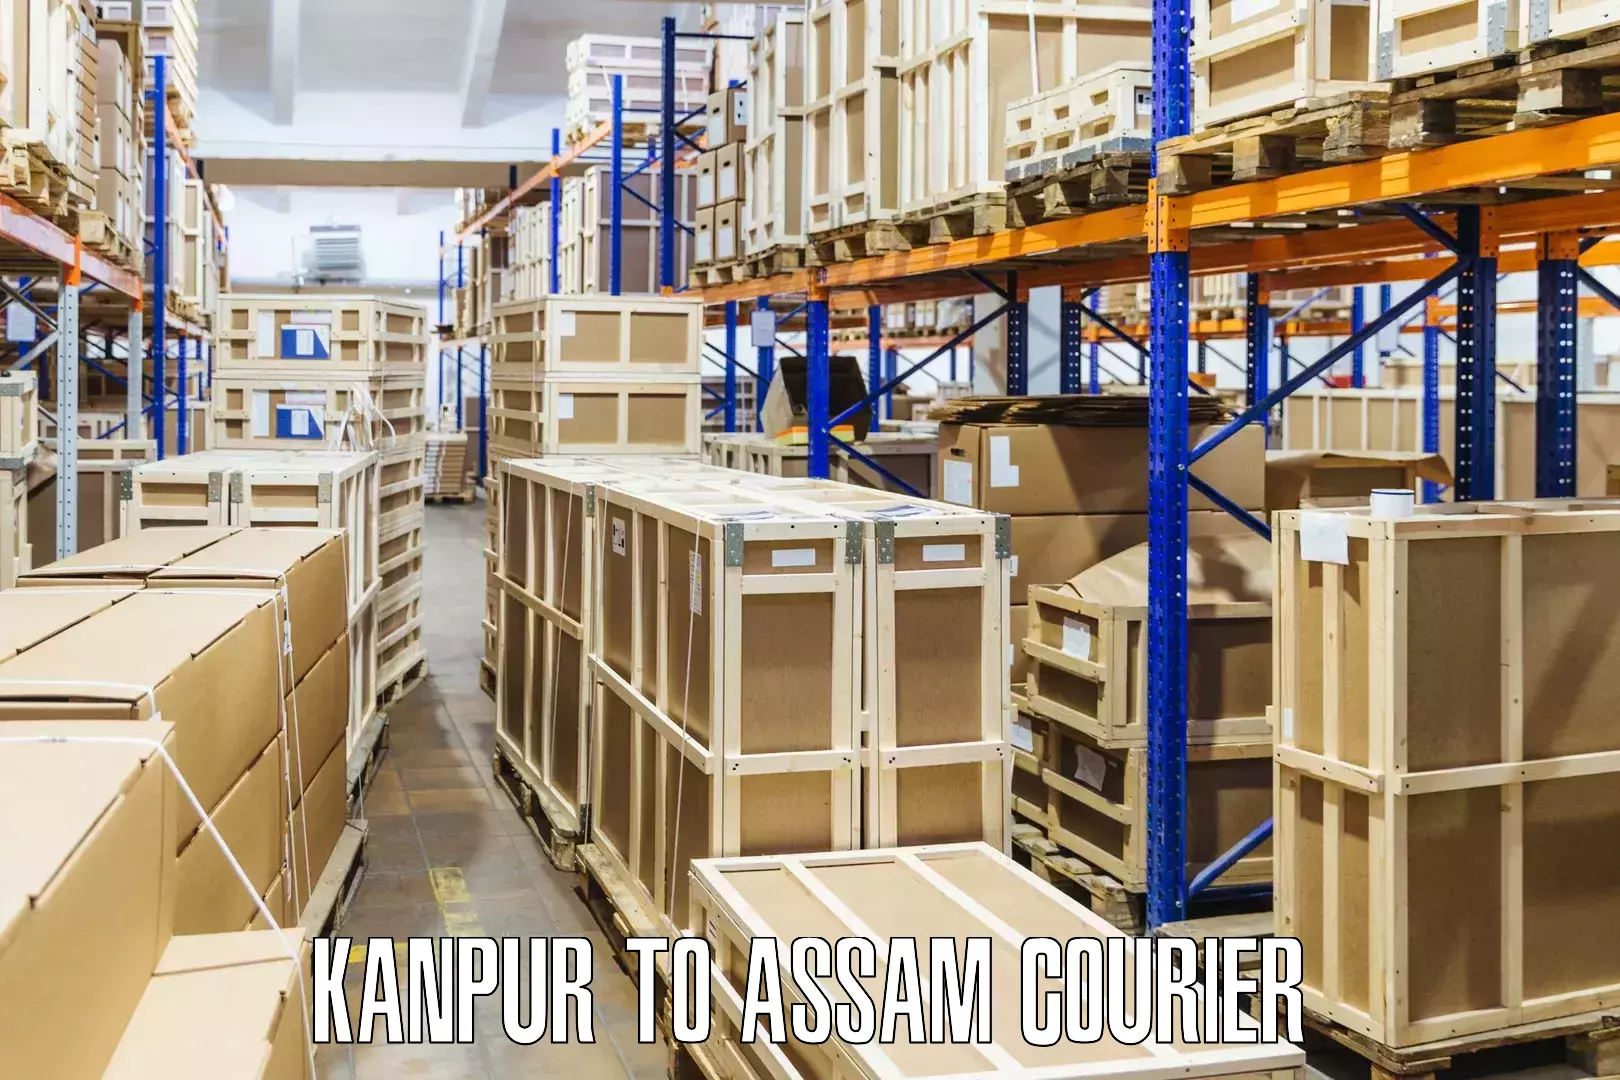 Express delivery capabilities in Kanpur to Lala Assam